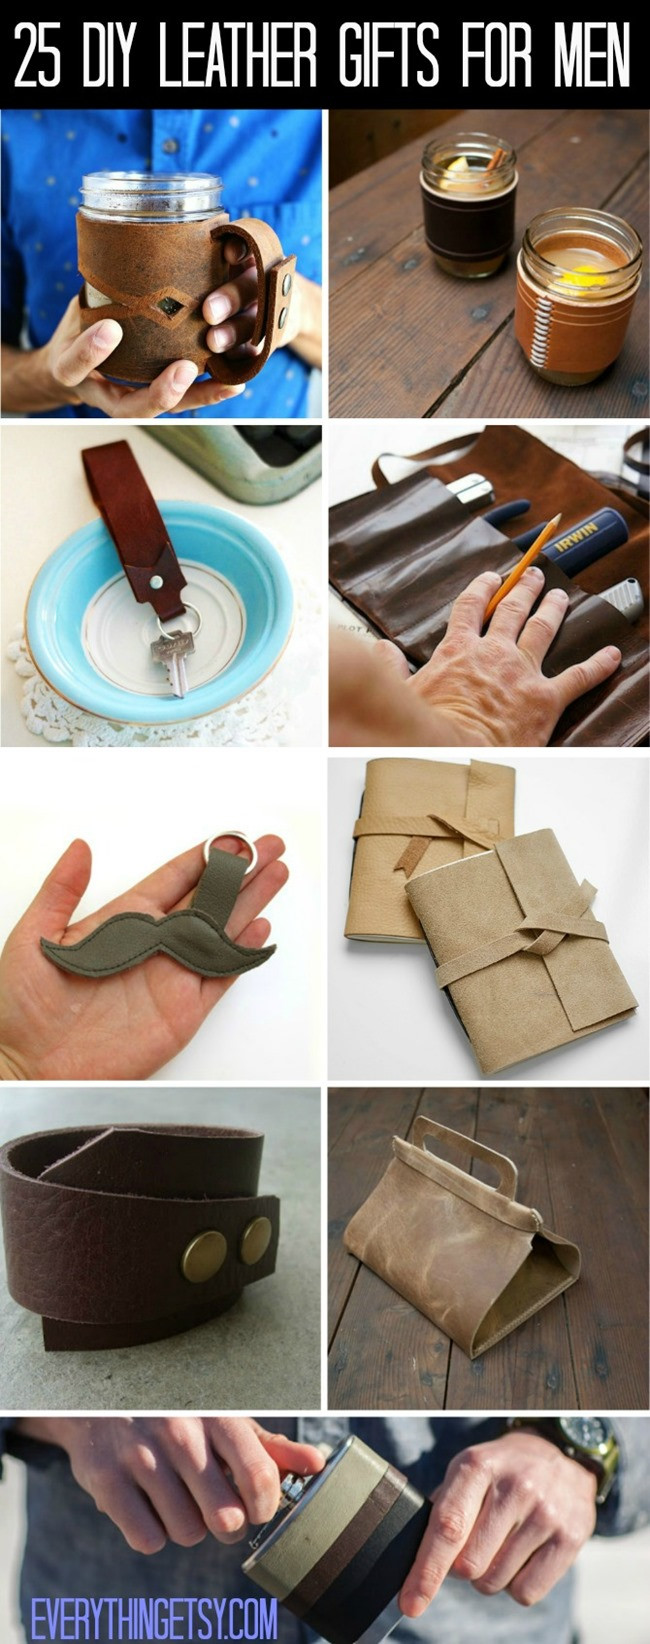 DIY Christmas Gifts For Men
 25 DIY Leather Gifts for Men